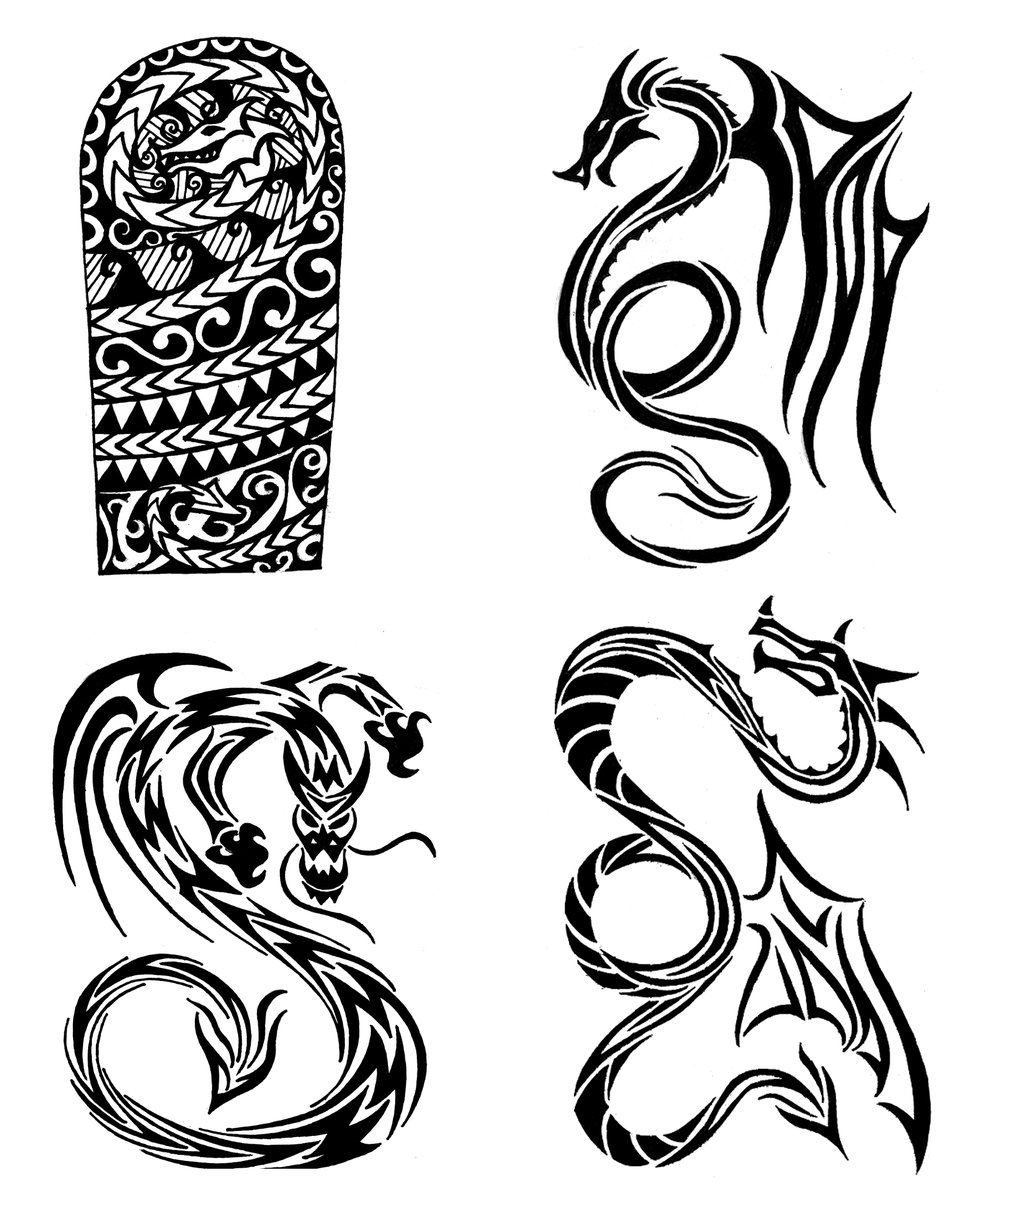 Dragon Dance Tribal Tattoo by wolfsouled on DeviantArt